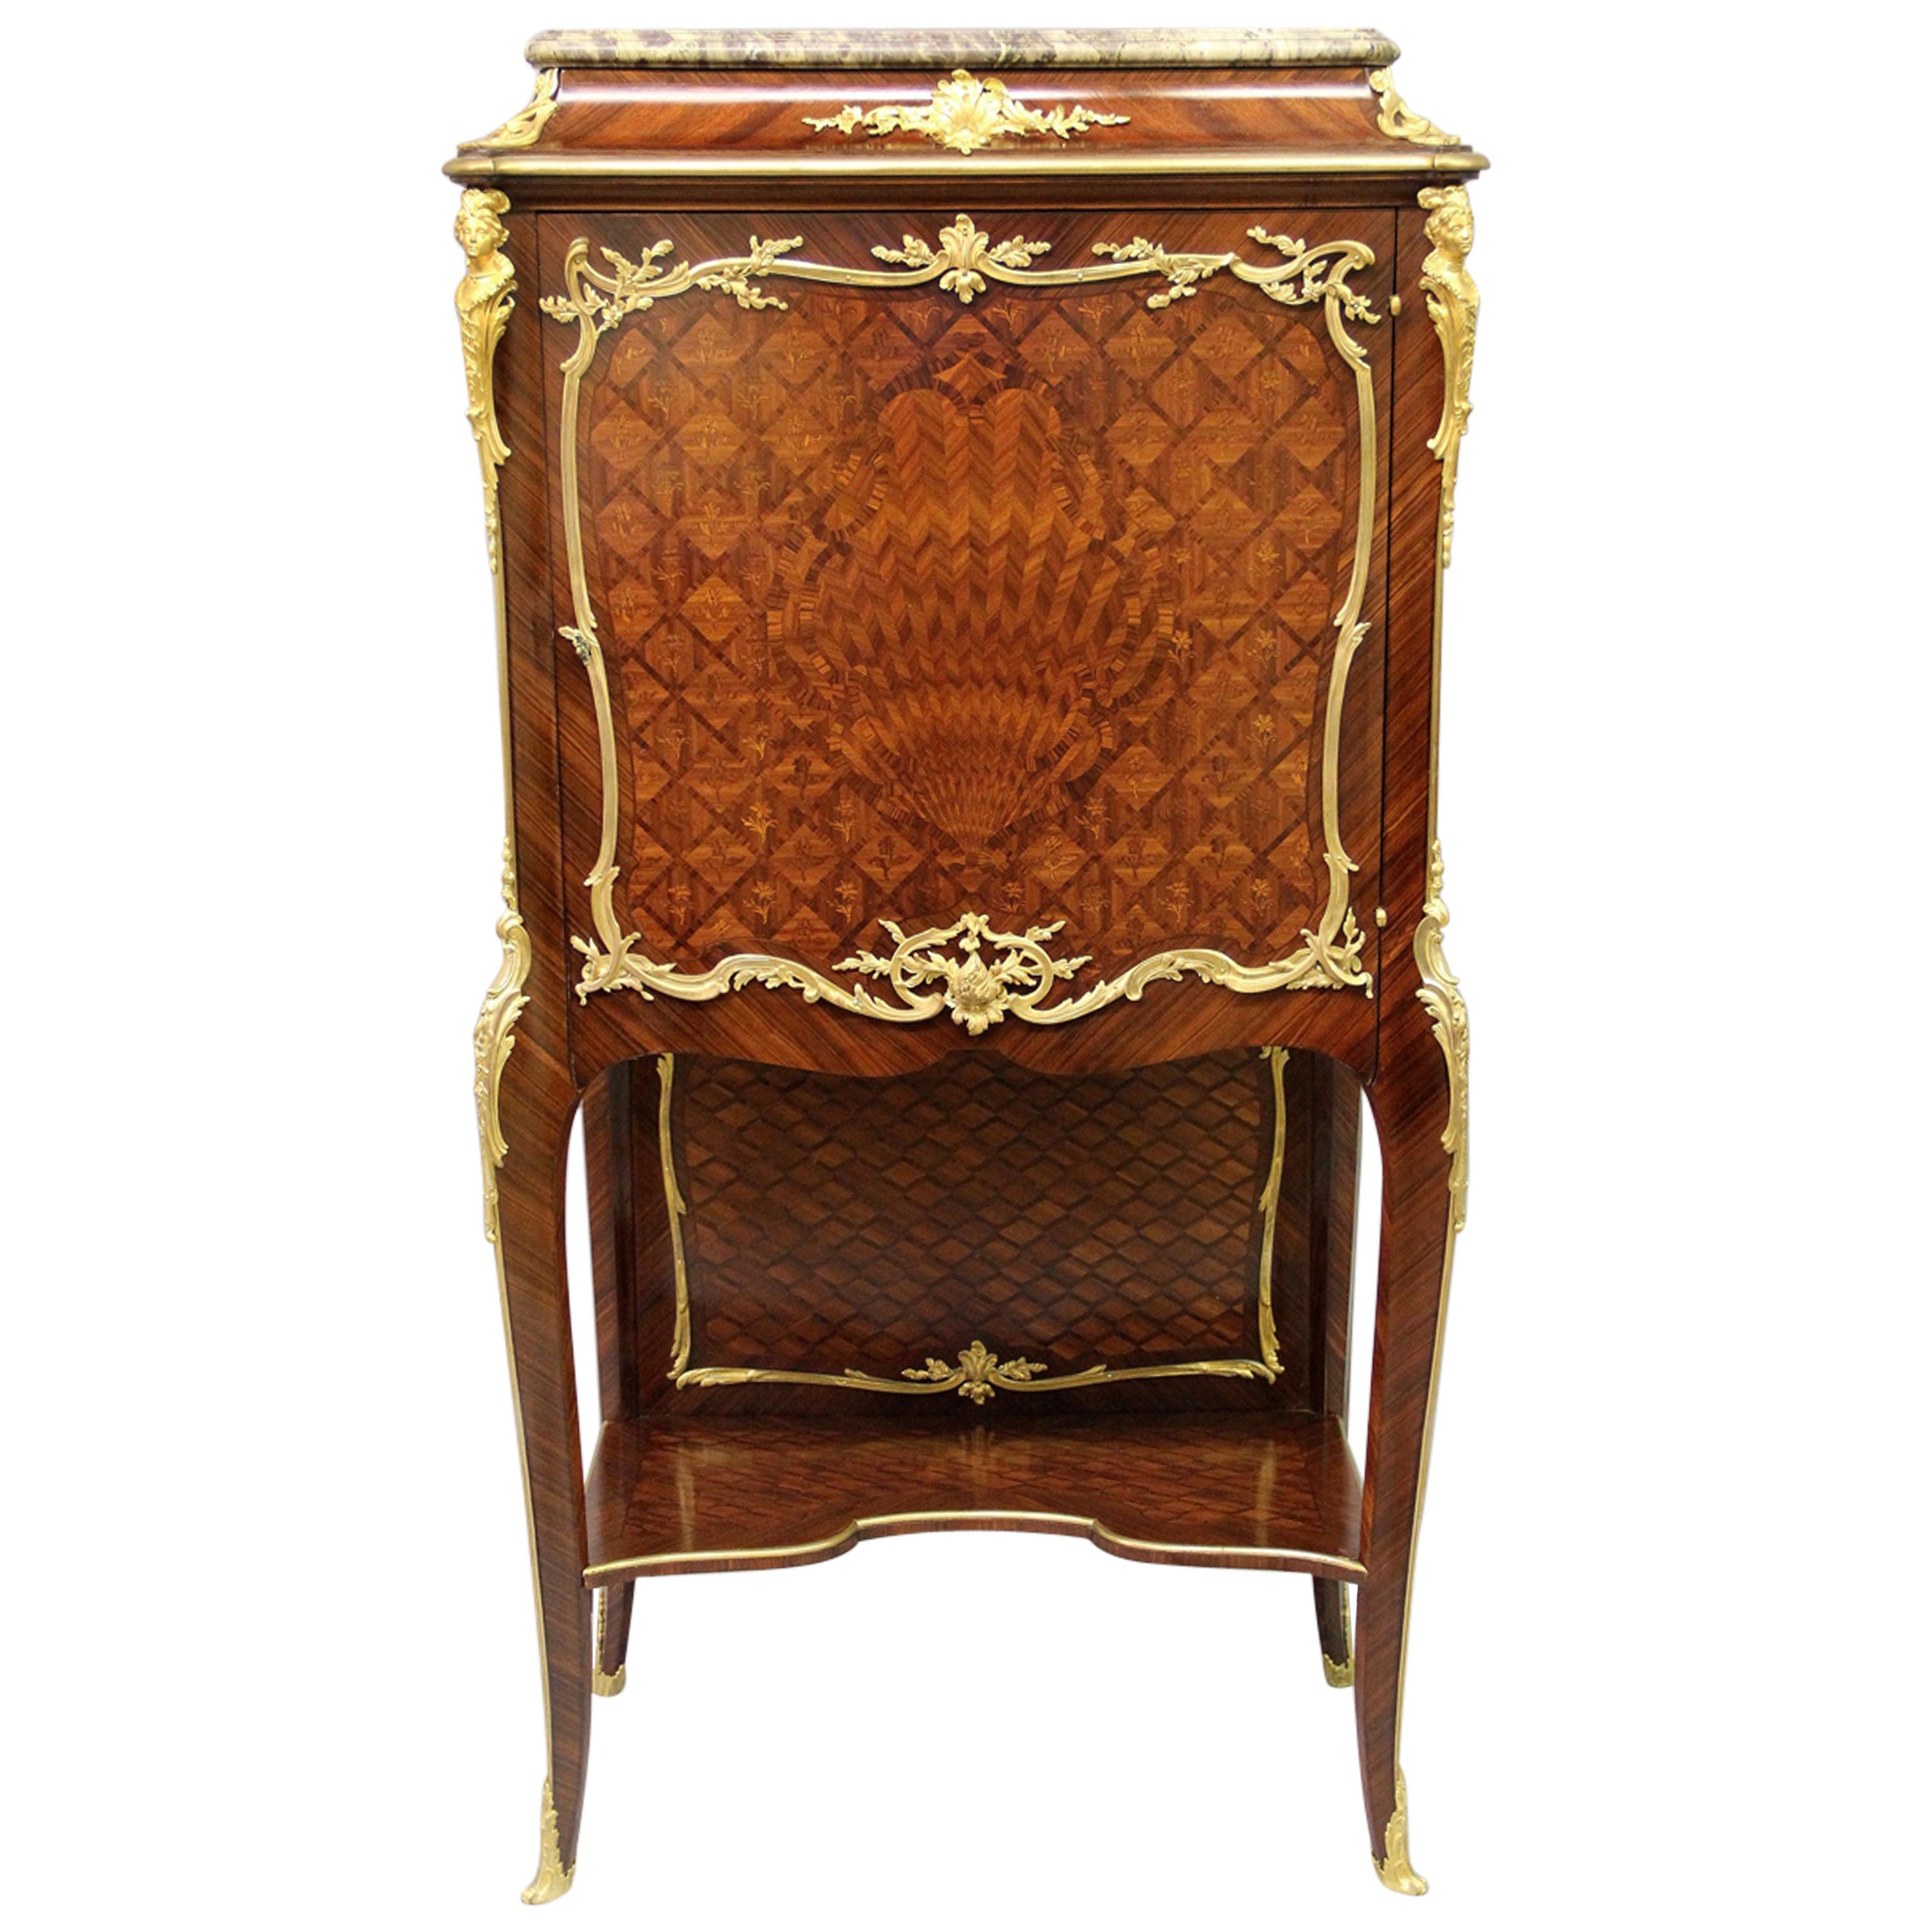 Late 19th Century Gilt Bronze Mounted Marquetry Cabinet by François Linke